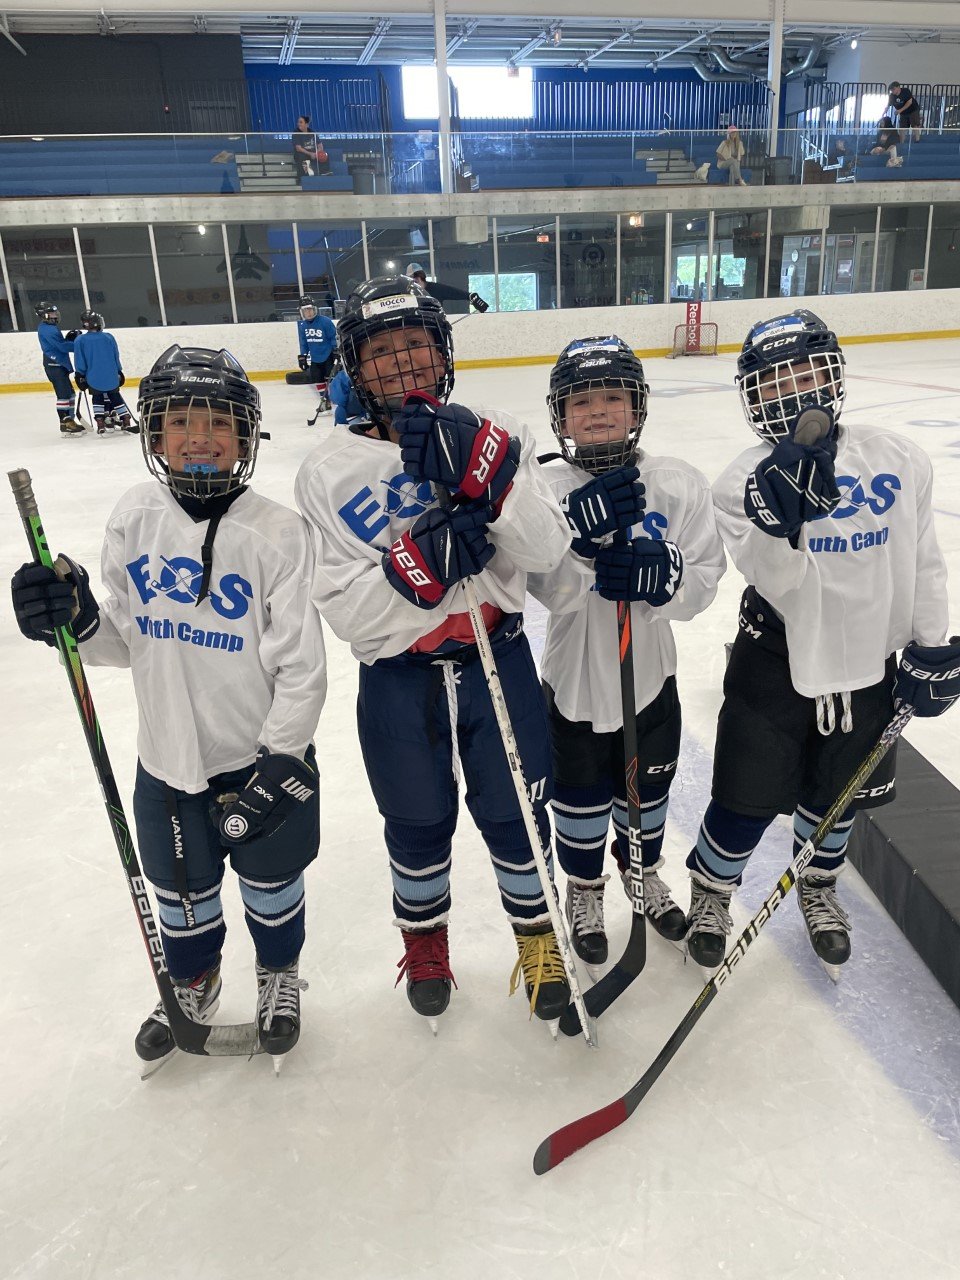 End of Summer Youth Hockey Camp — Johnny's Icehouse